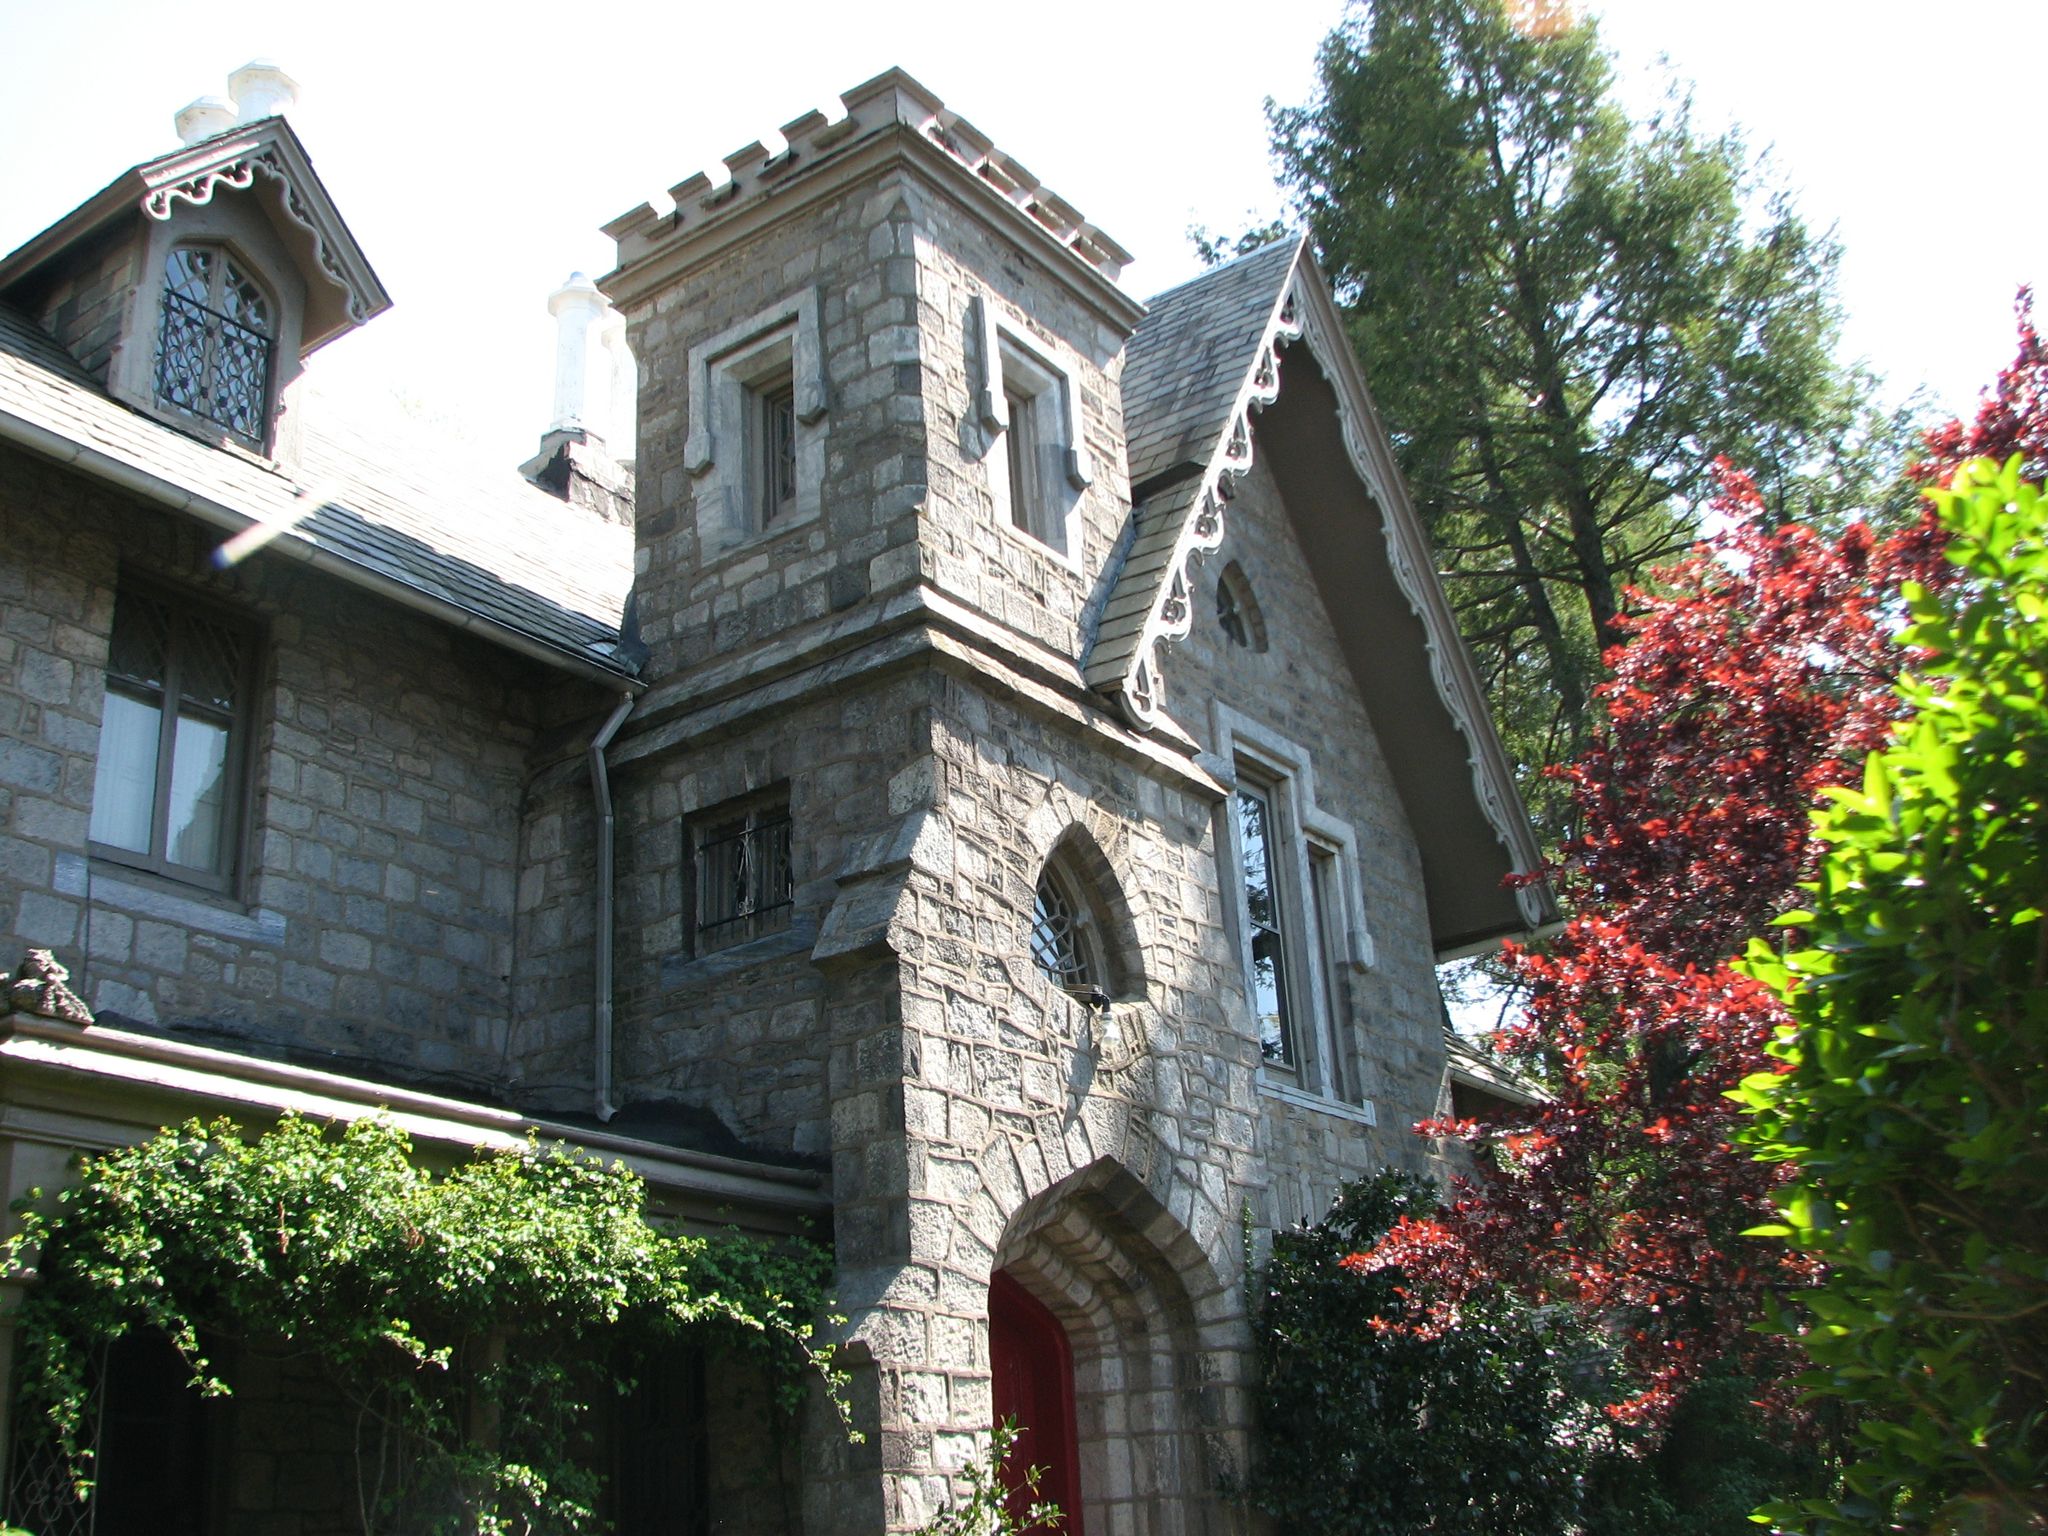 The Mitchell House is attributed to architect Samuel Sloan.